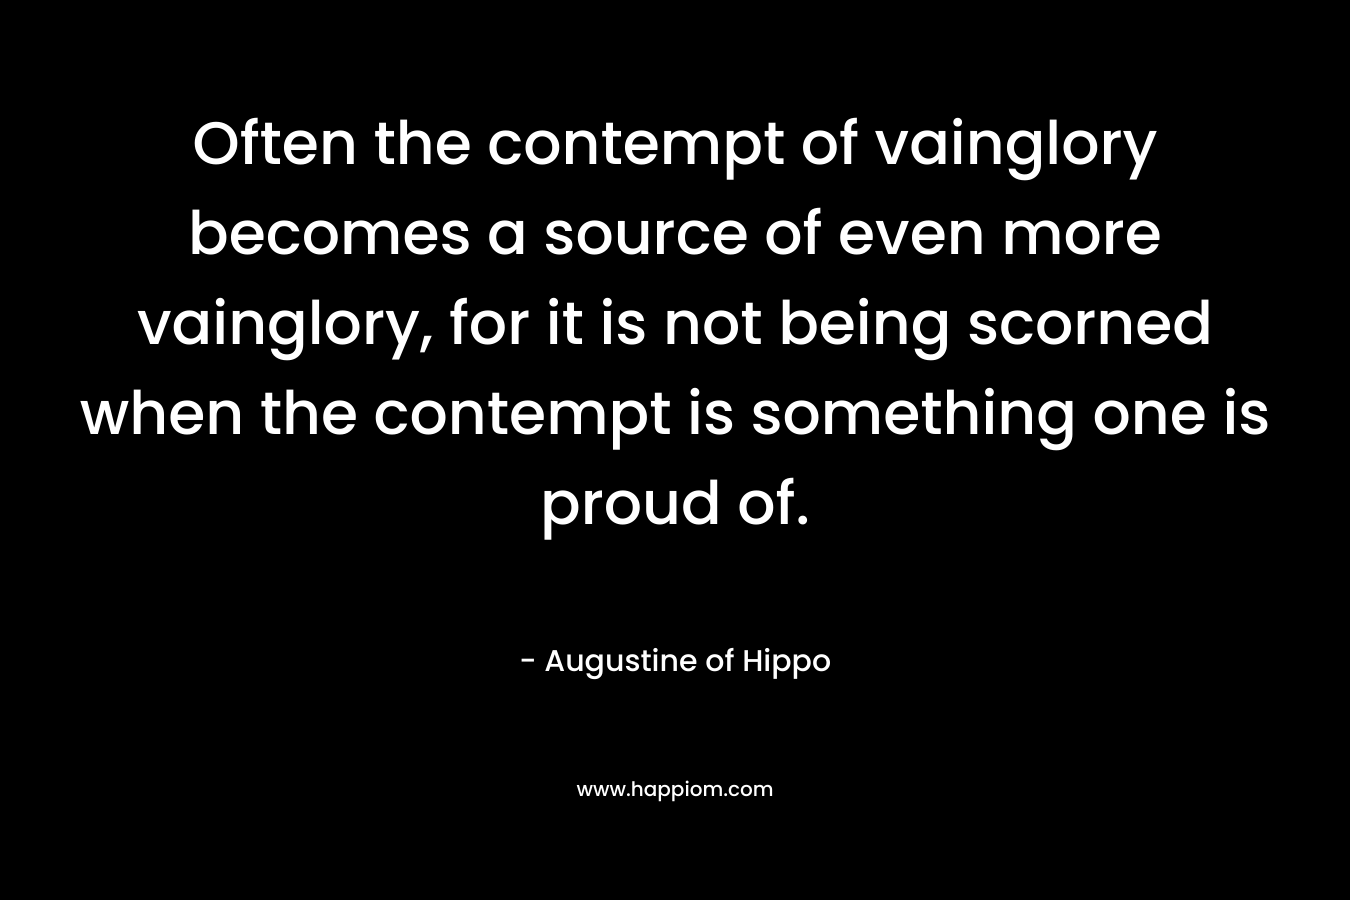 Often the contempt of vainglory becomes a source of even more vainglory, for it is not being scorned when the contempt is something one is proud of.